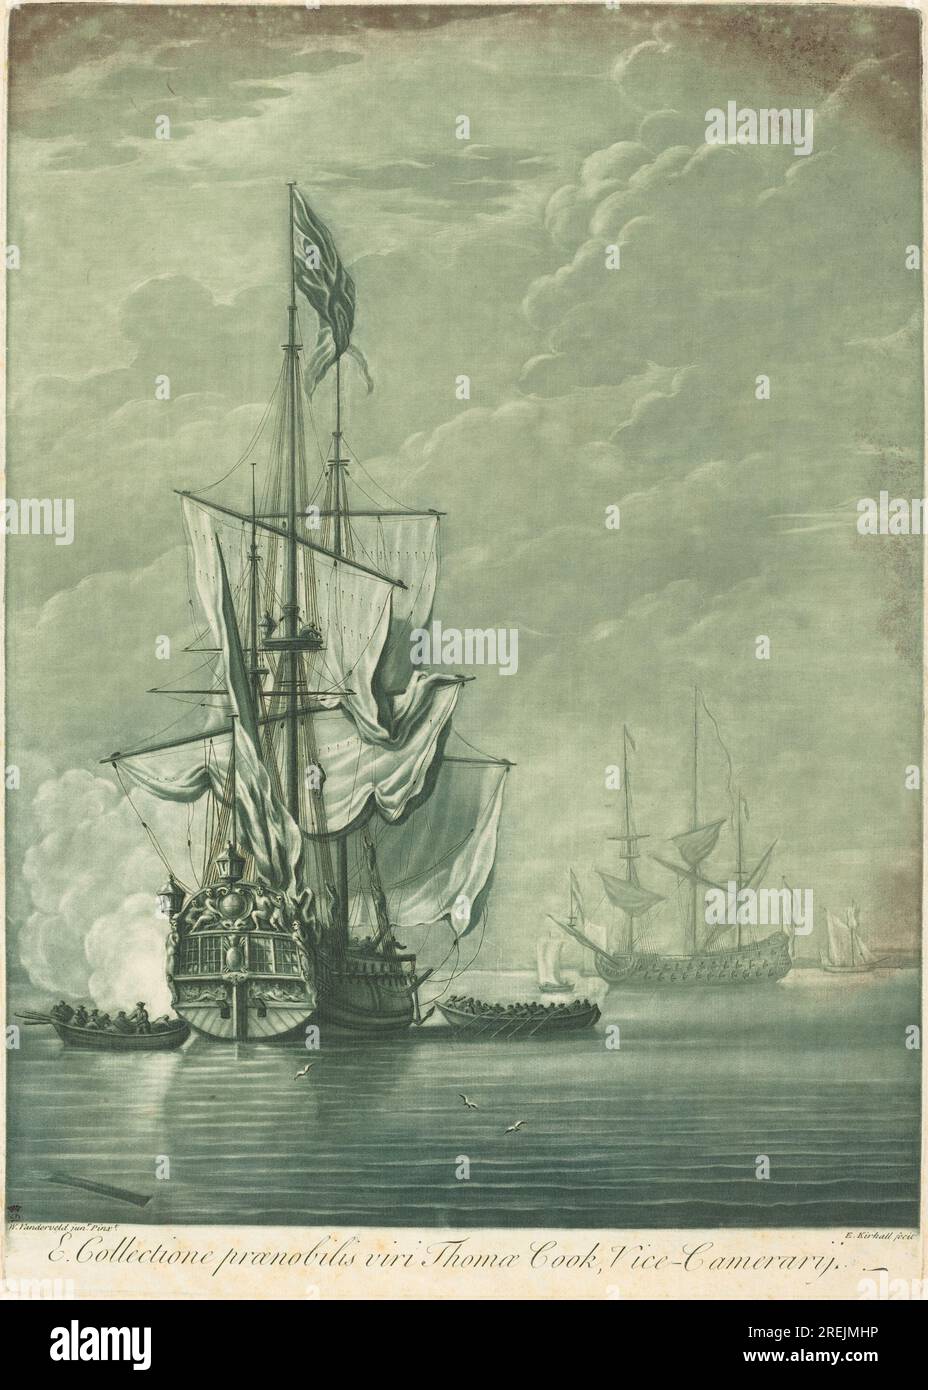 'Elisha Kirkall after Willem van de Velde the Elder, Shipping Scene from the Collection of Thomas Cook, 1720s, mezzotint and etching printed in green and black on laid paper, plate: 33.5 x 40.2 cm (13 3/16 x 15 13/16 in.) sheet: 35.6 x 43200 cm (14 x 17007 13/16 in.), Paul Mellon Fund, 2001.118.17.7' Stock Photo